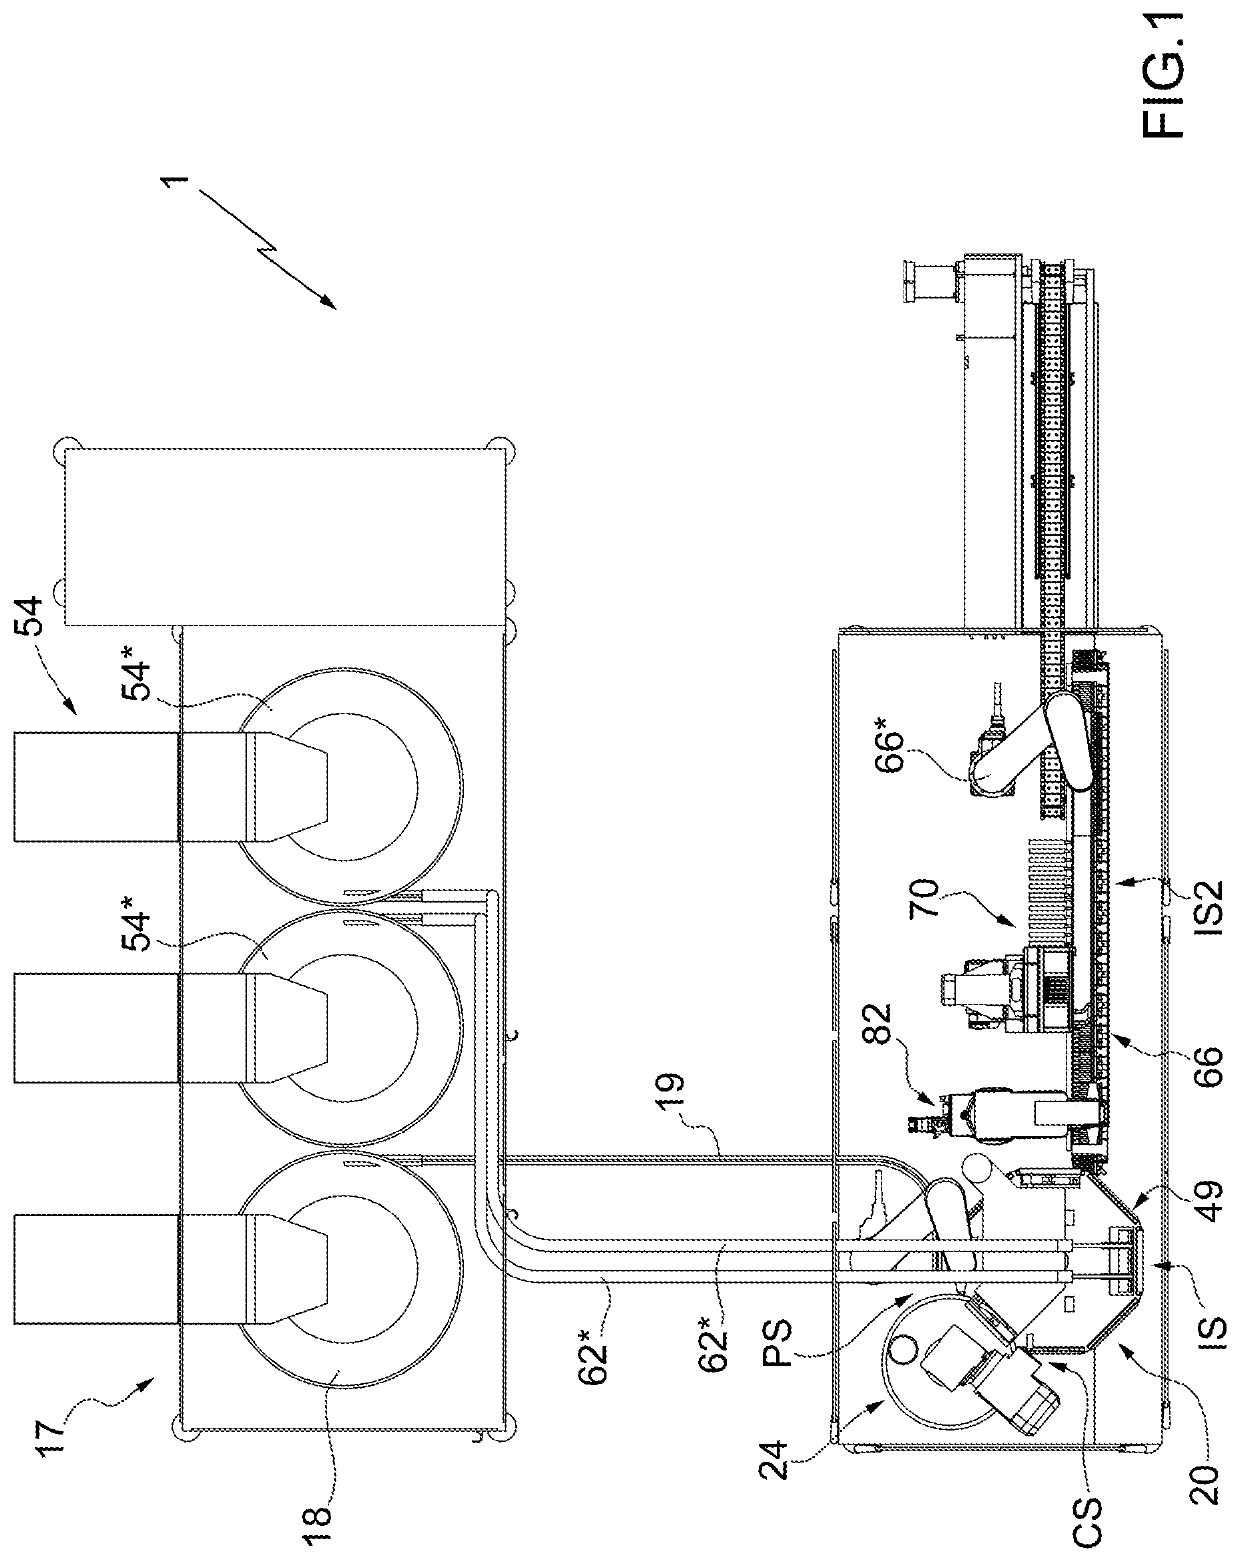 Machine for producing substantially cylindrical articles